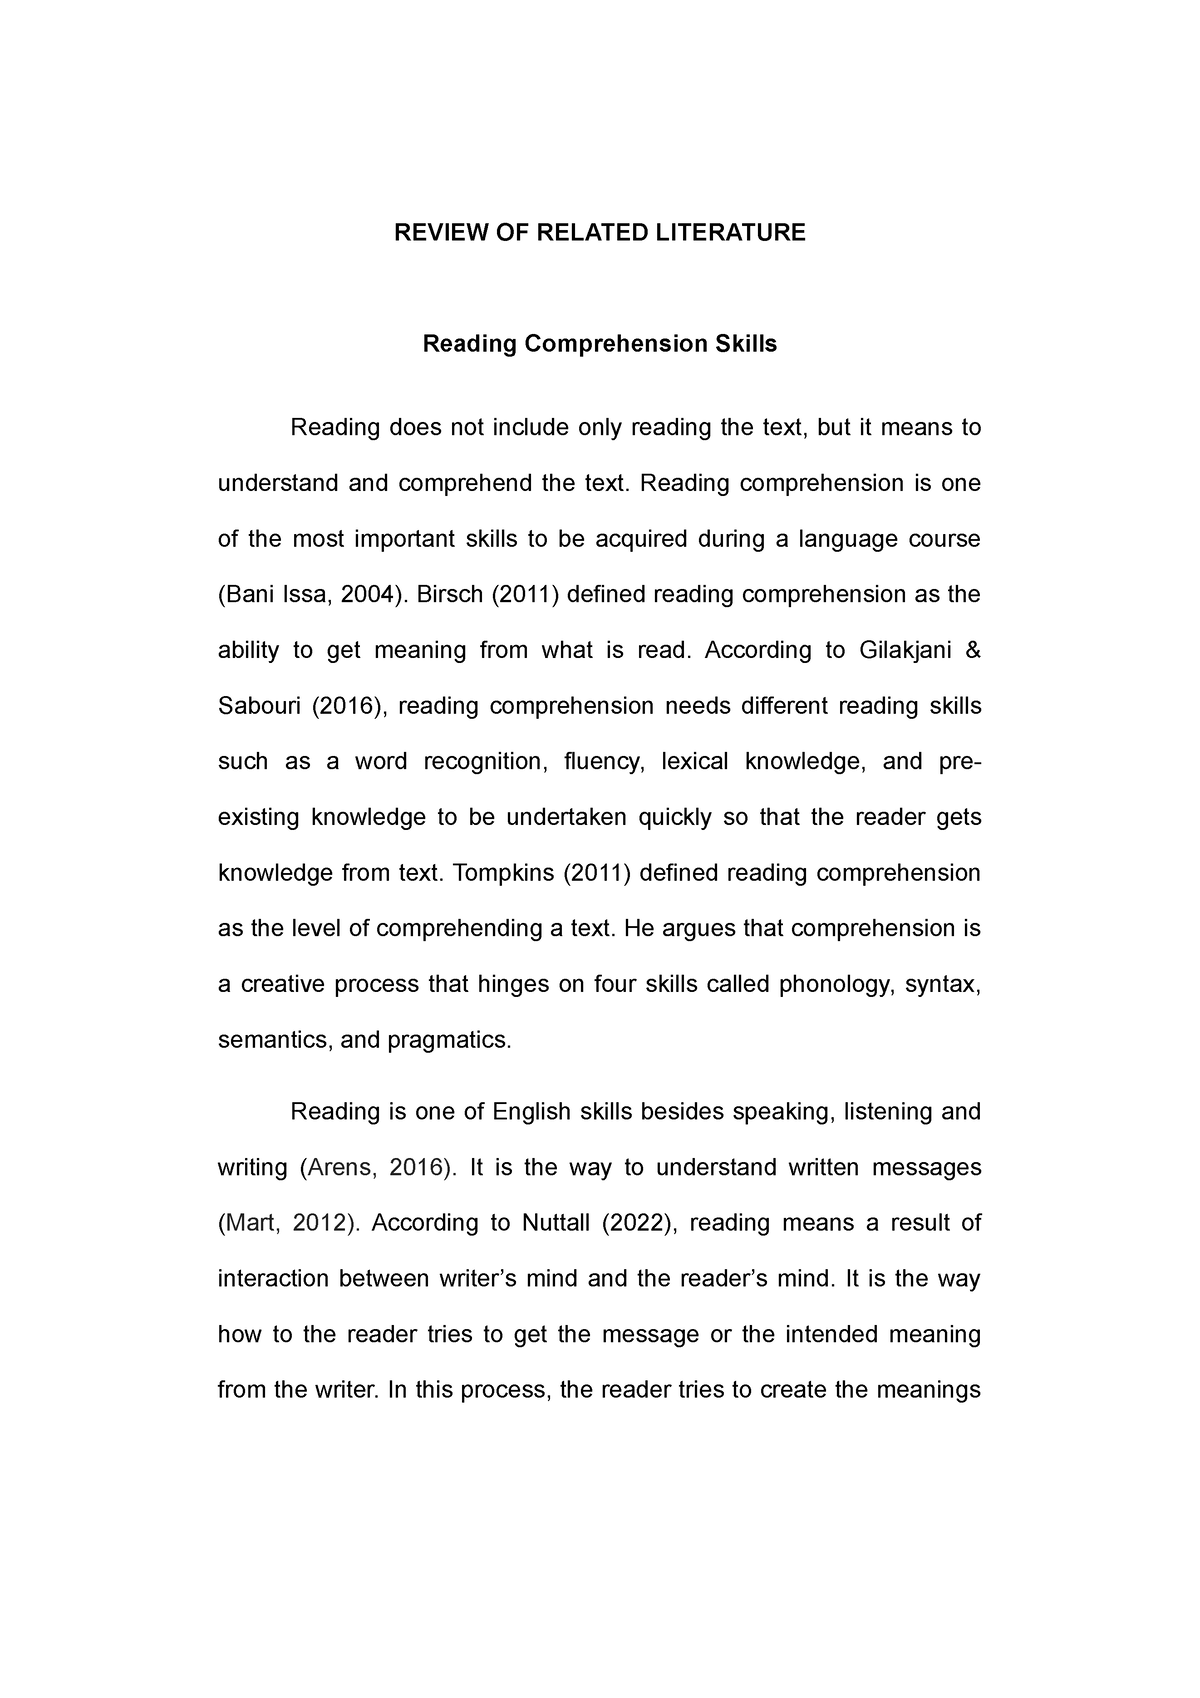 literature review of reading comprehension